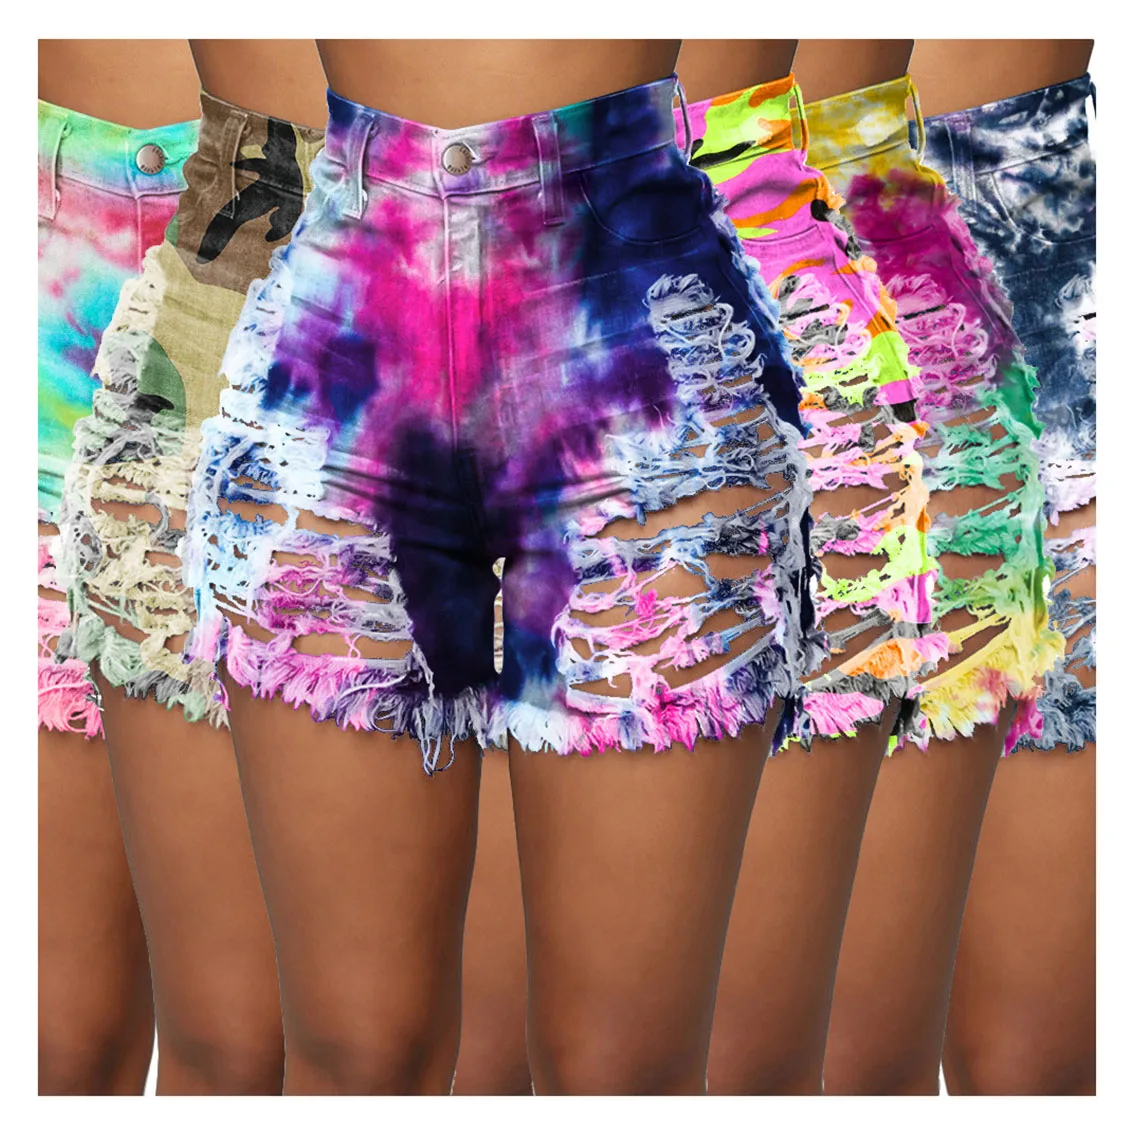 

2021 New Trendy Women Distressed Denim Jeans Shorts Stretch Hollow Button Tie Dye Printed Ripped Jeans Shorts, As show